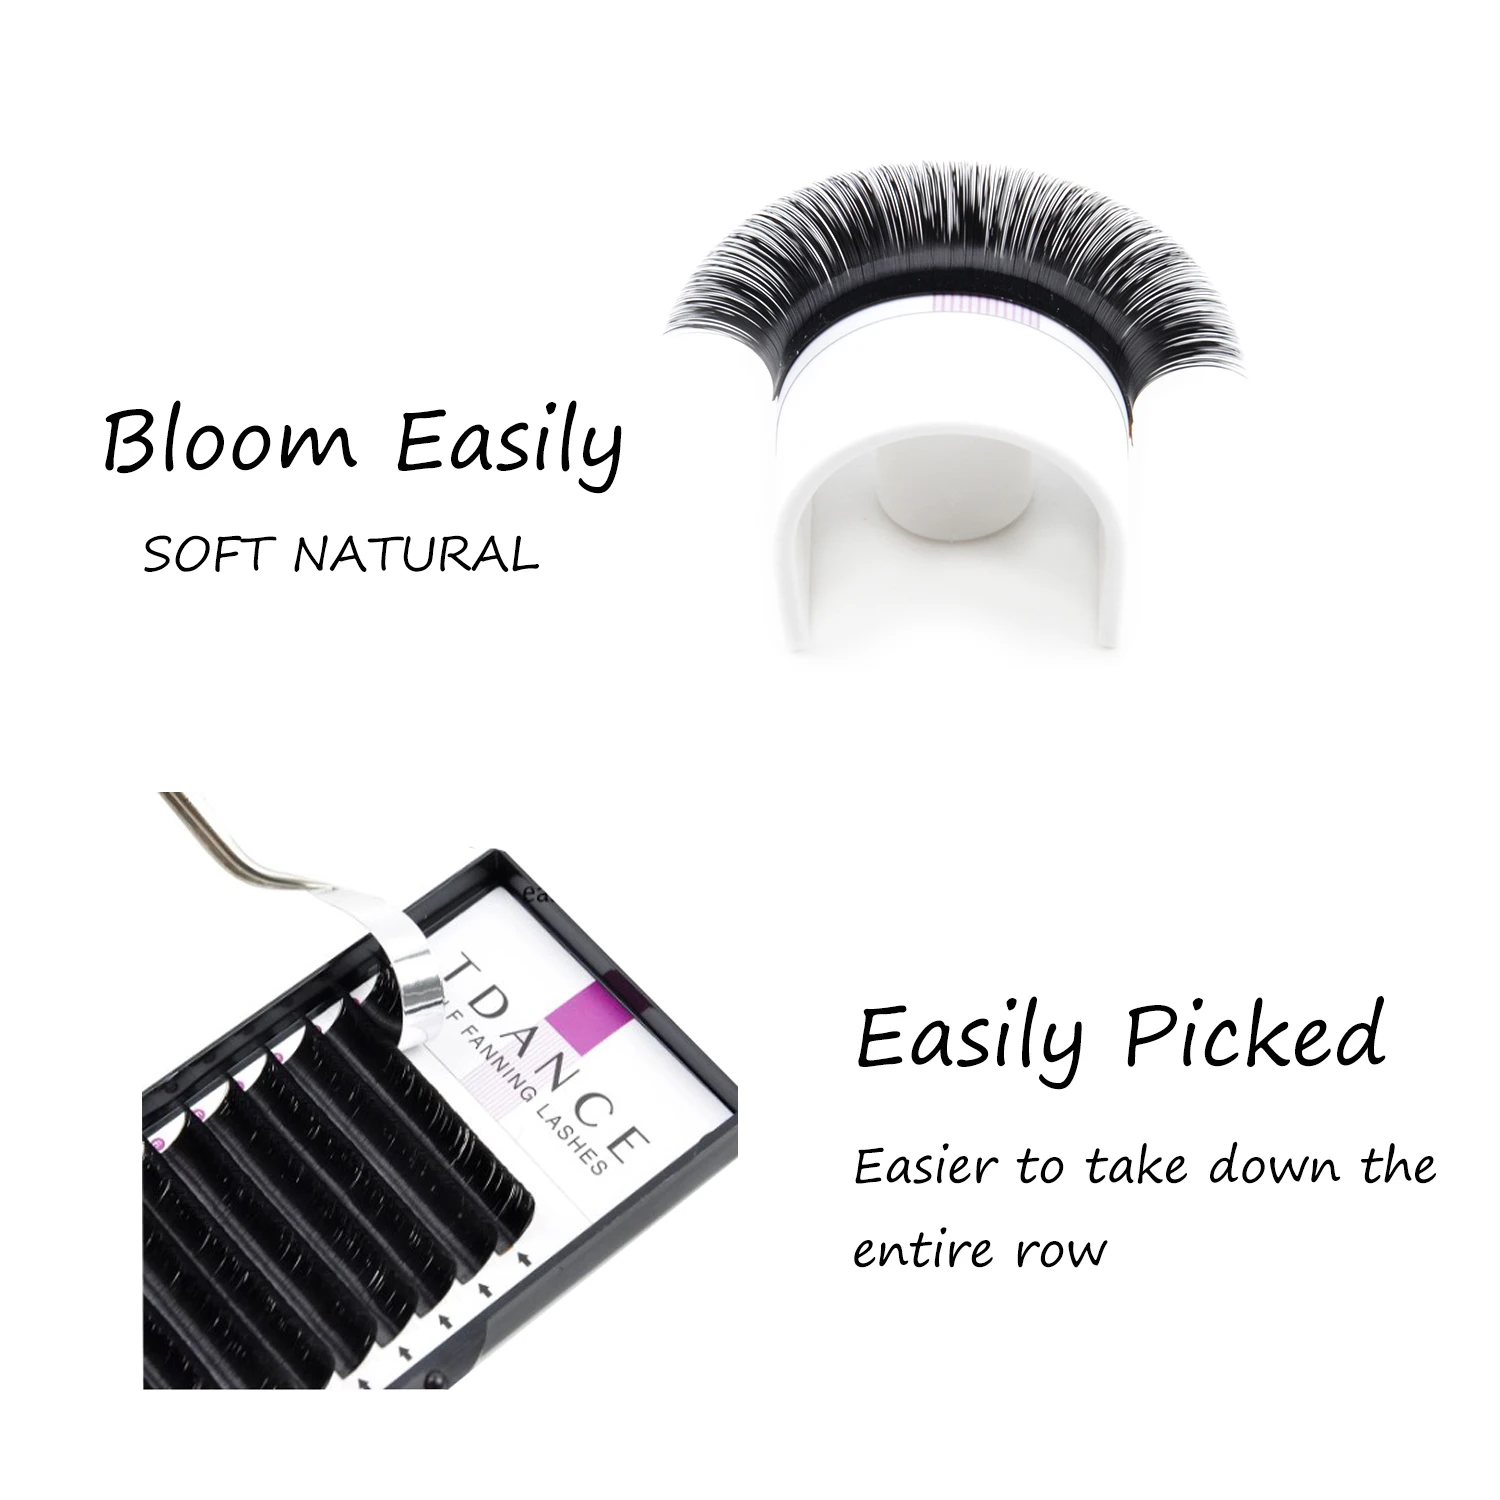 H54a9447c45de45599a5d1019744ee33a3 TDANCE Individual Easy Fan Eyelashes Extention Faux Mink Soft Natural Volume Makeup Fast Blooming False Lash Growth Lift Beauty